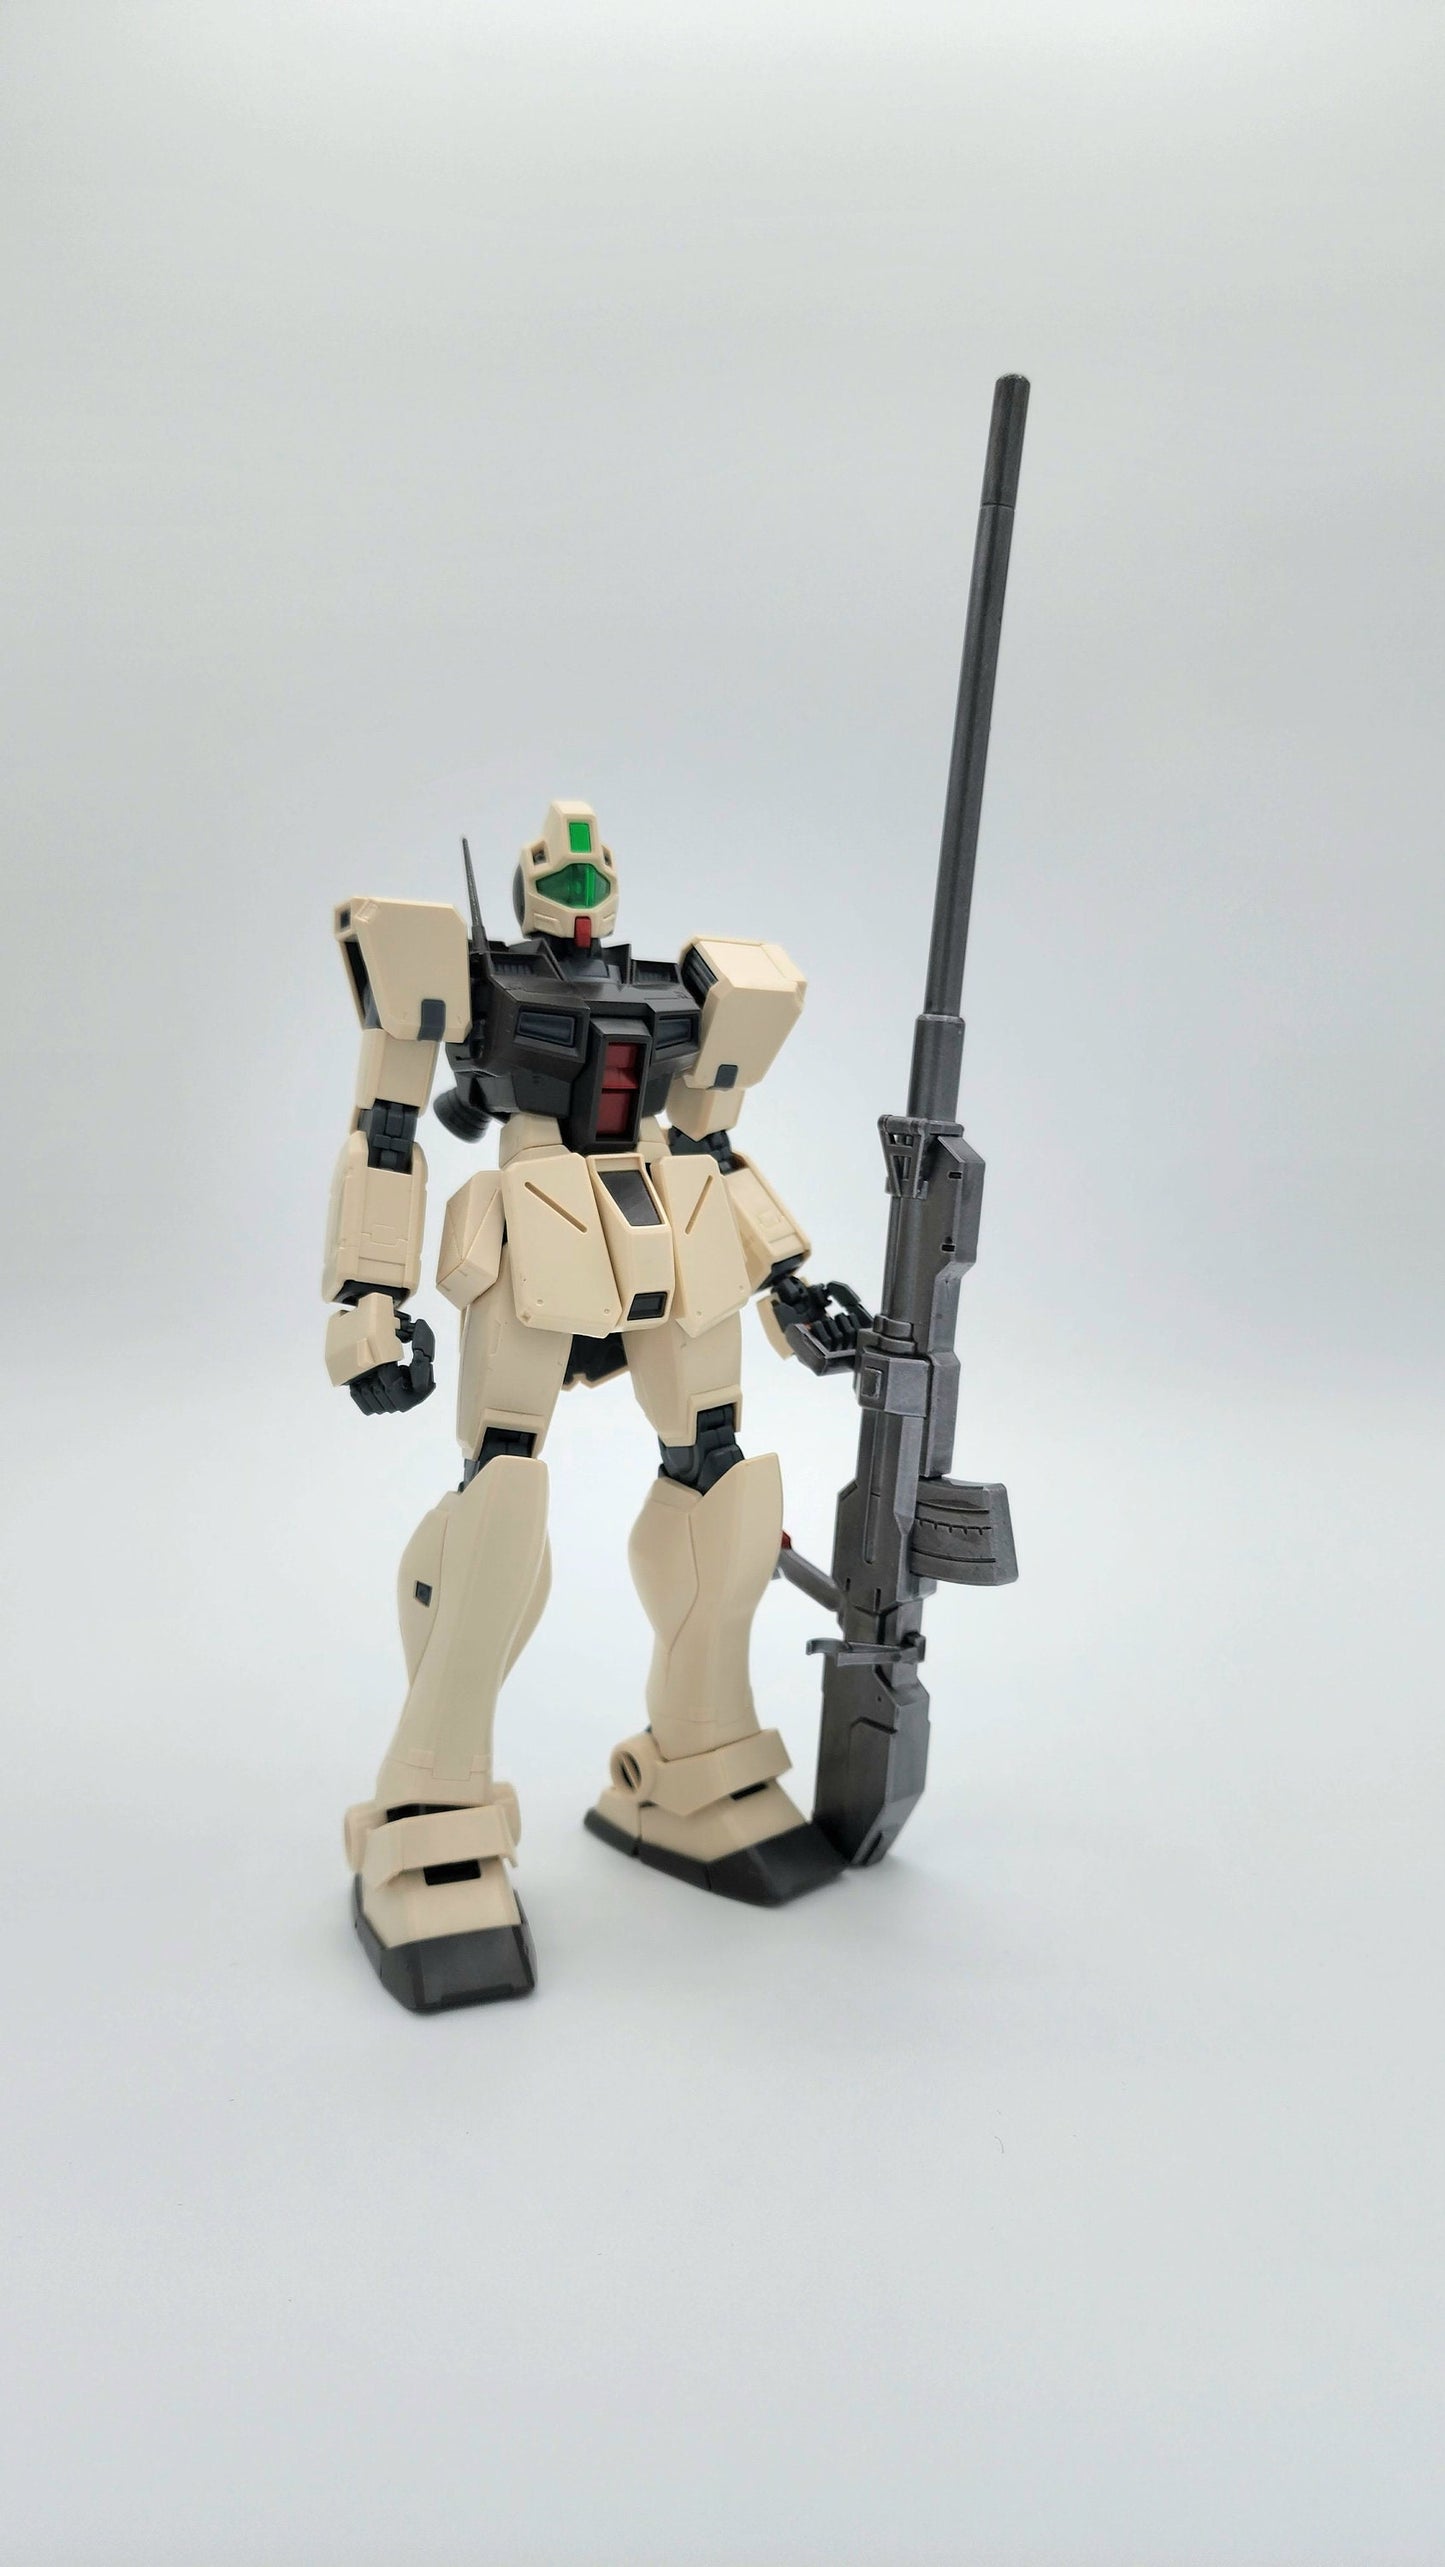 170mm Cannon (Resin Weapon Kit)